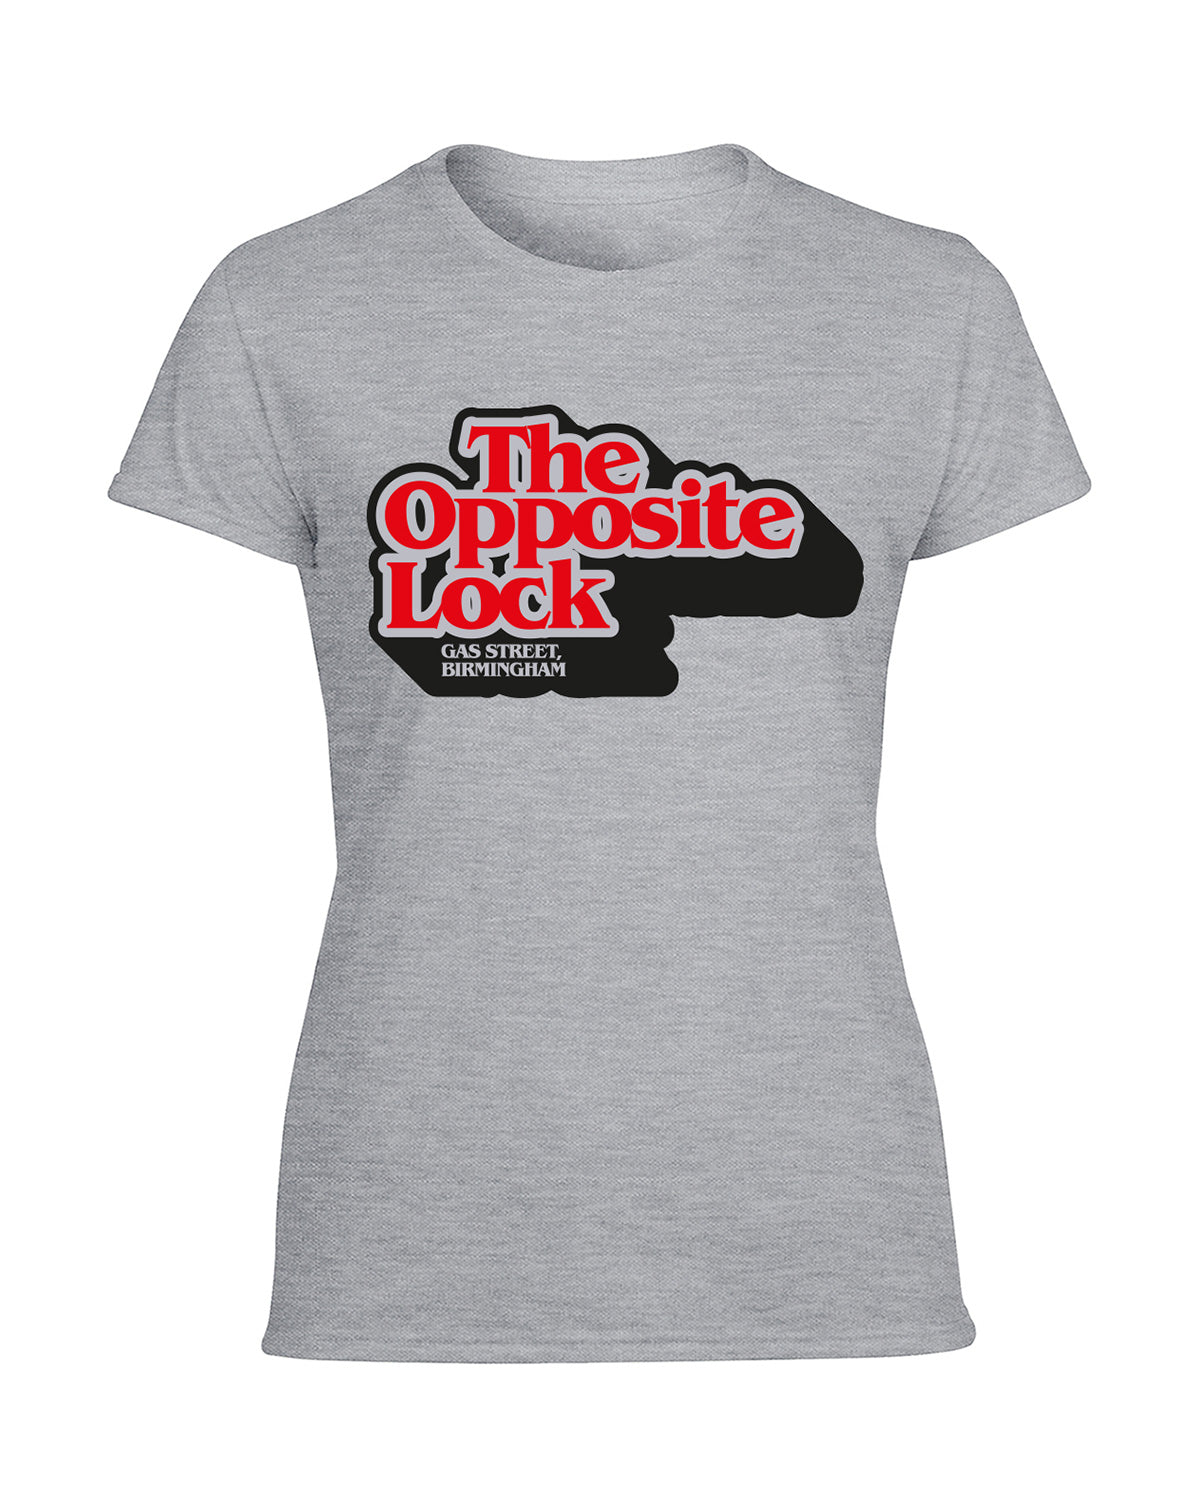 The Opposite Lock ladies fit T-shirt - various colours - Dirty Stop Outs